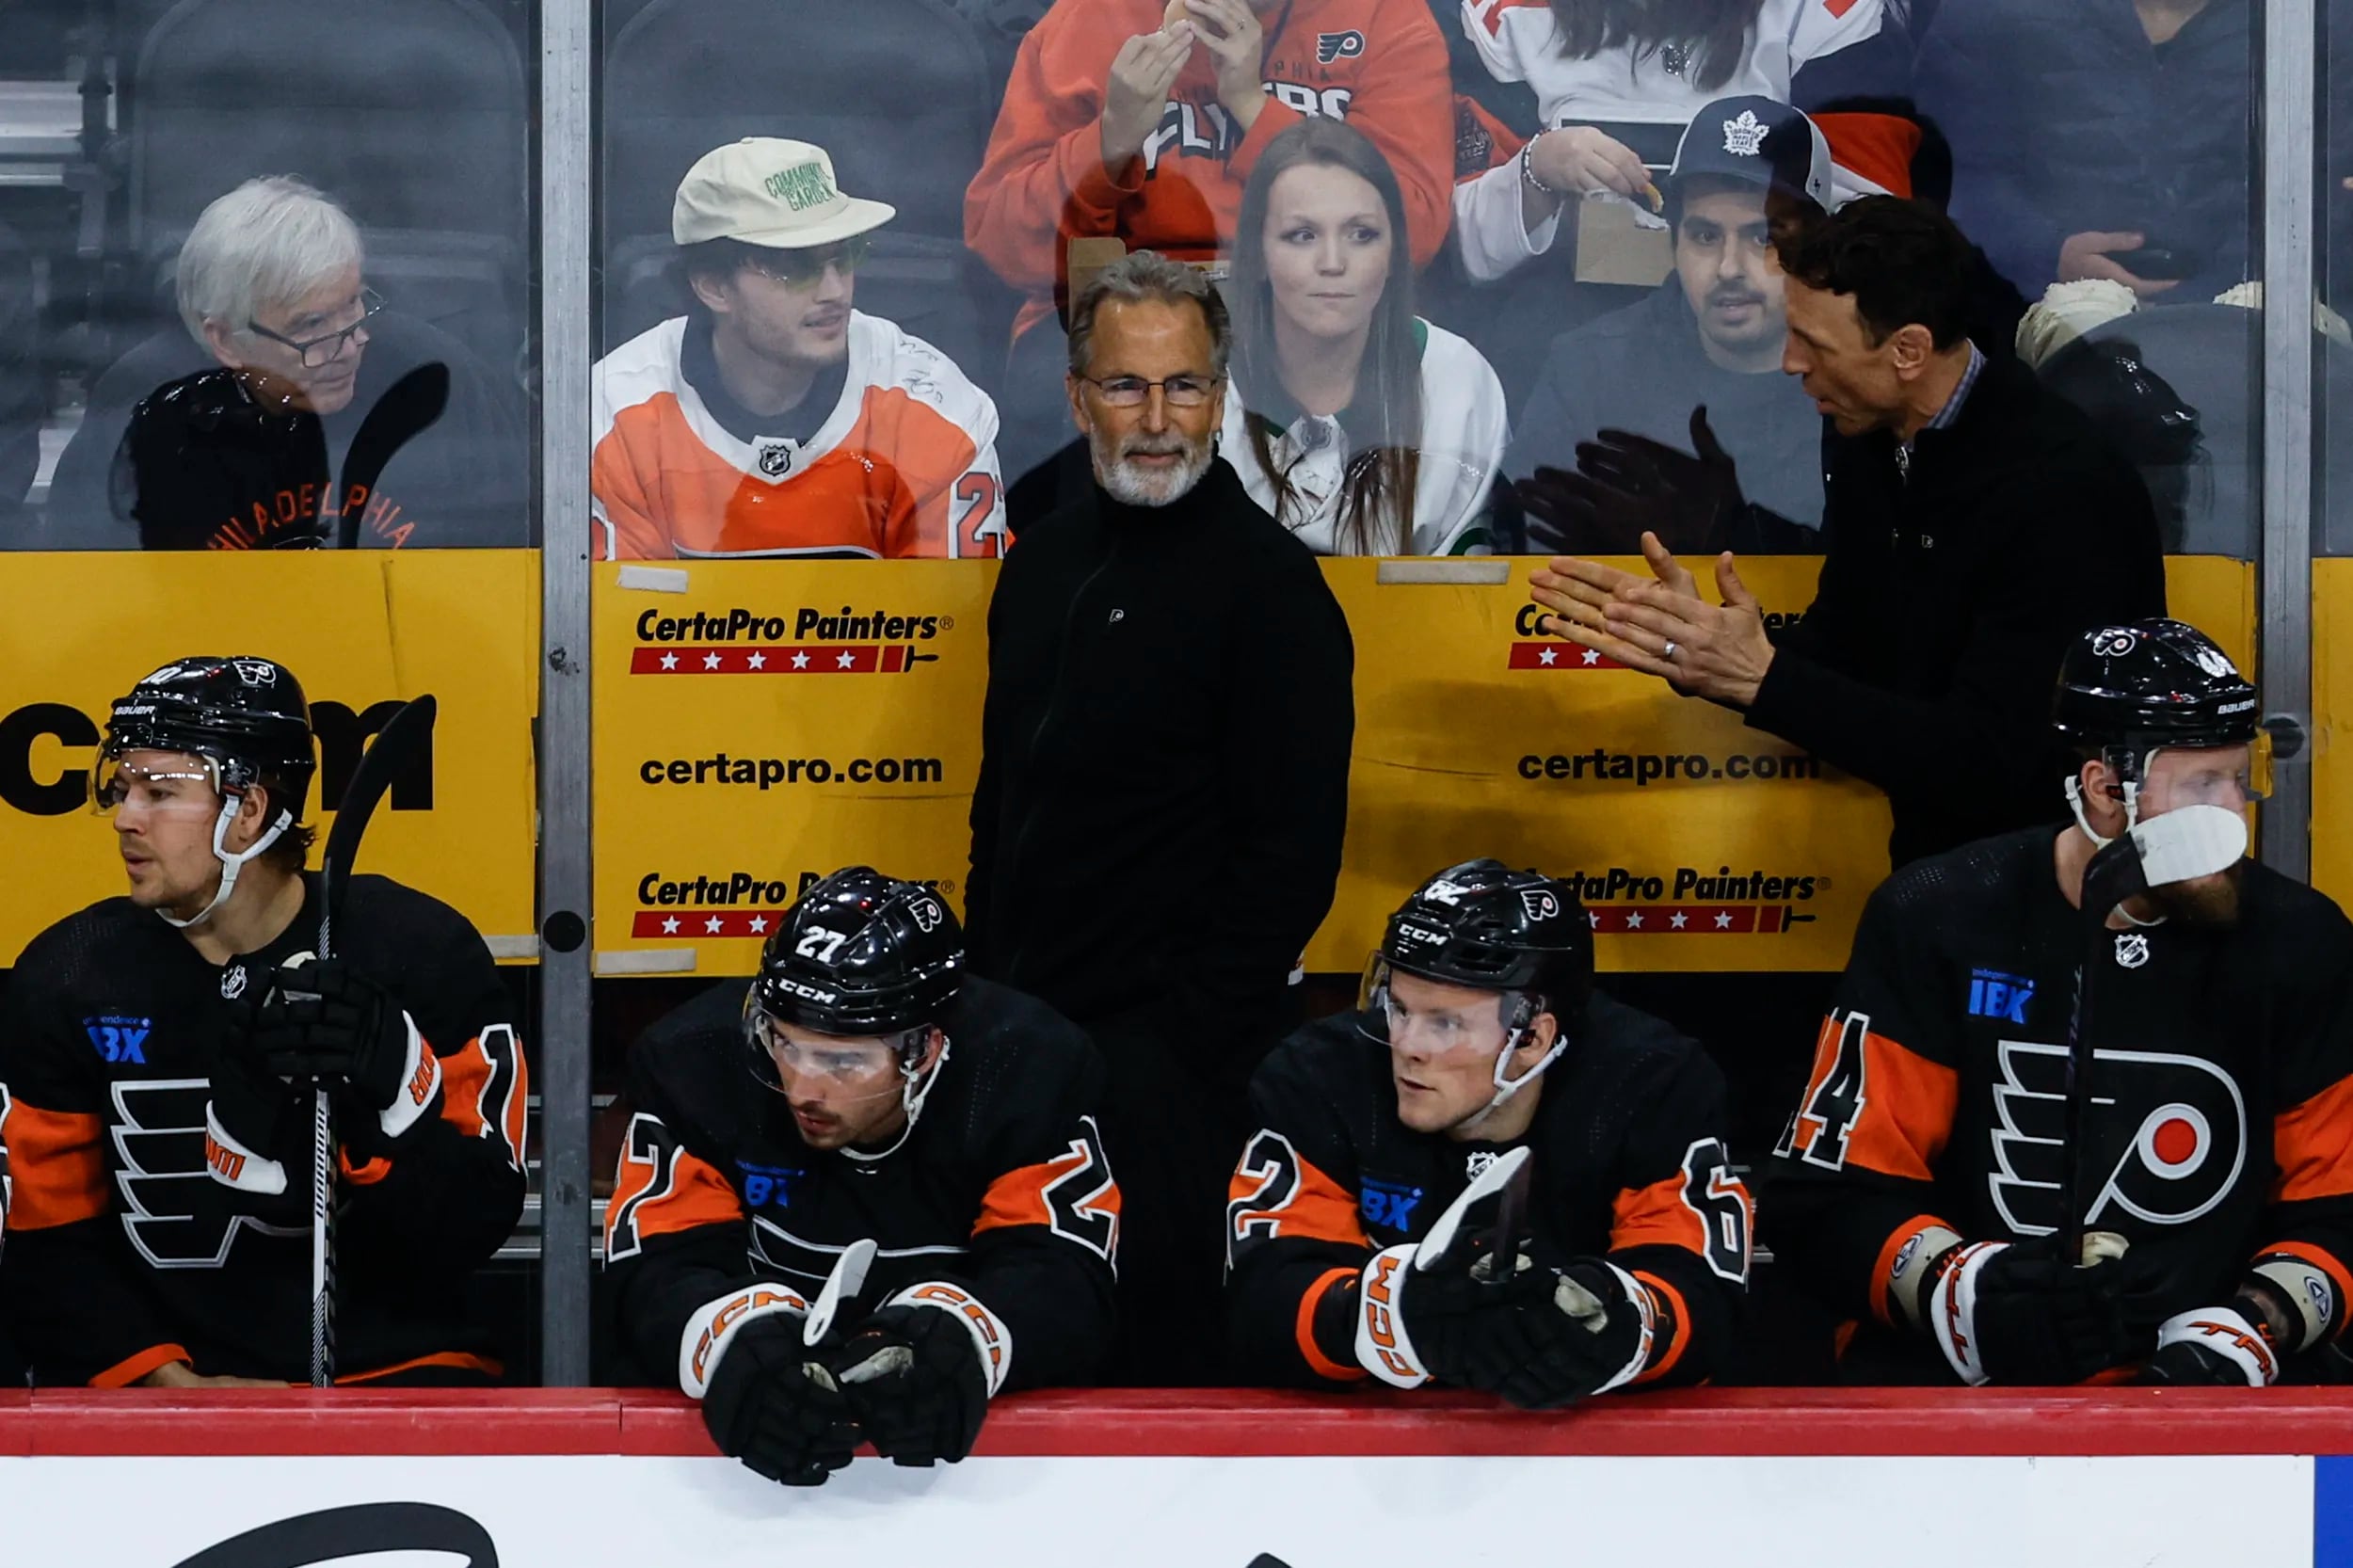 John Tortorella's Flyers will now need some help to make the playoffs.